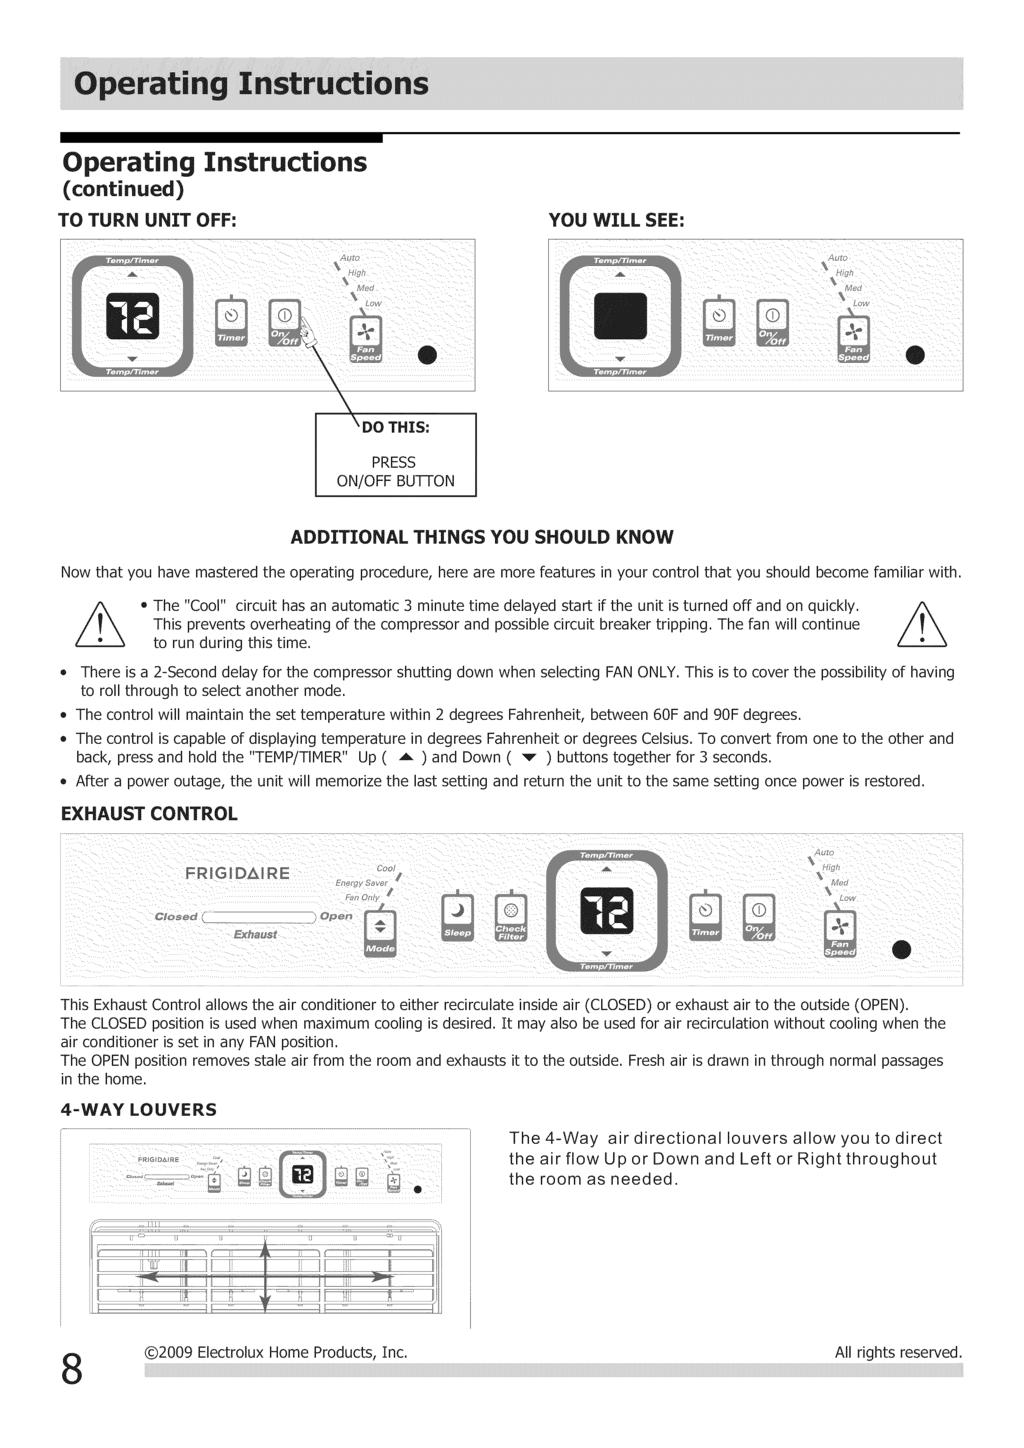 Operating Instructions (continued) TO TURN UNIT OFF: YOU WILL SEE: ONOFF BUTTON ADDITIONAL THINGS YOU SHOULD KNOW Now that you have mastered the operating procedure, here are more features in your